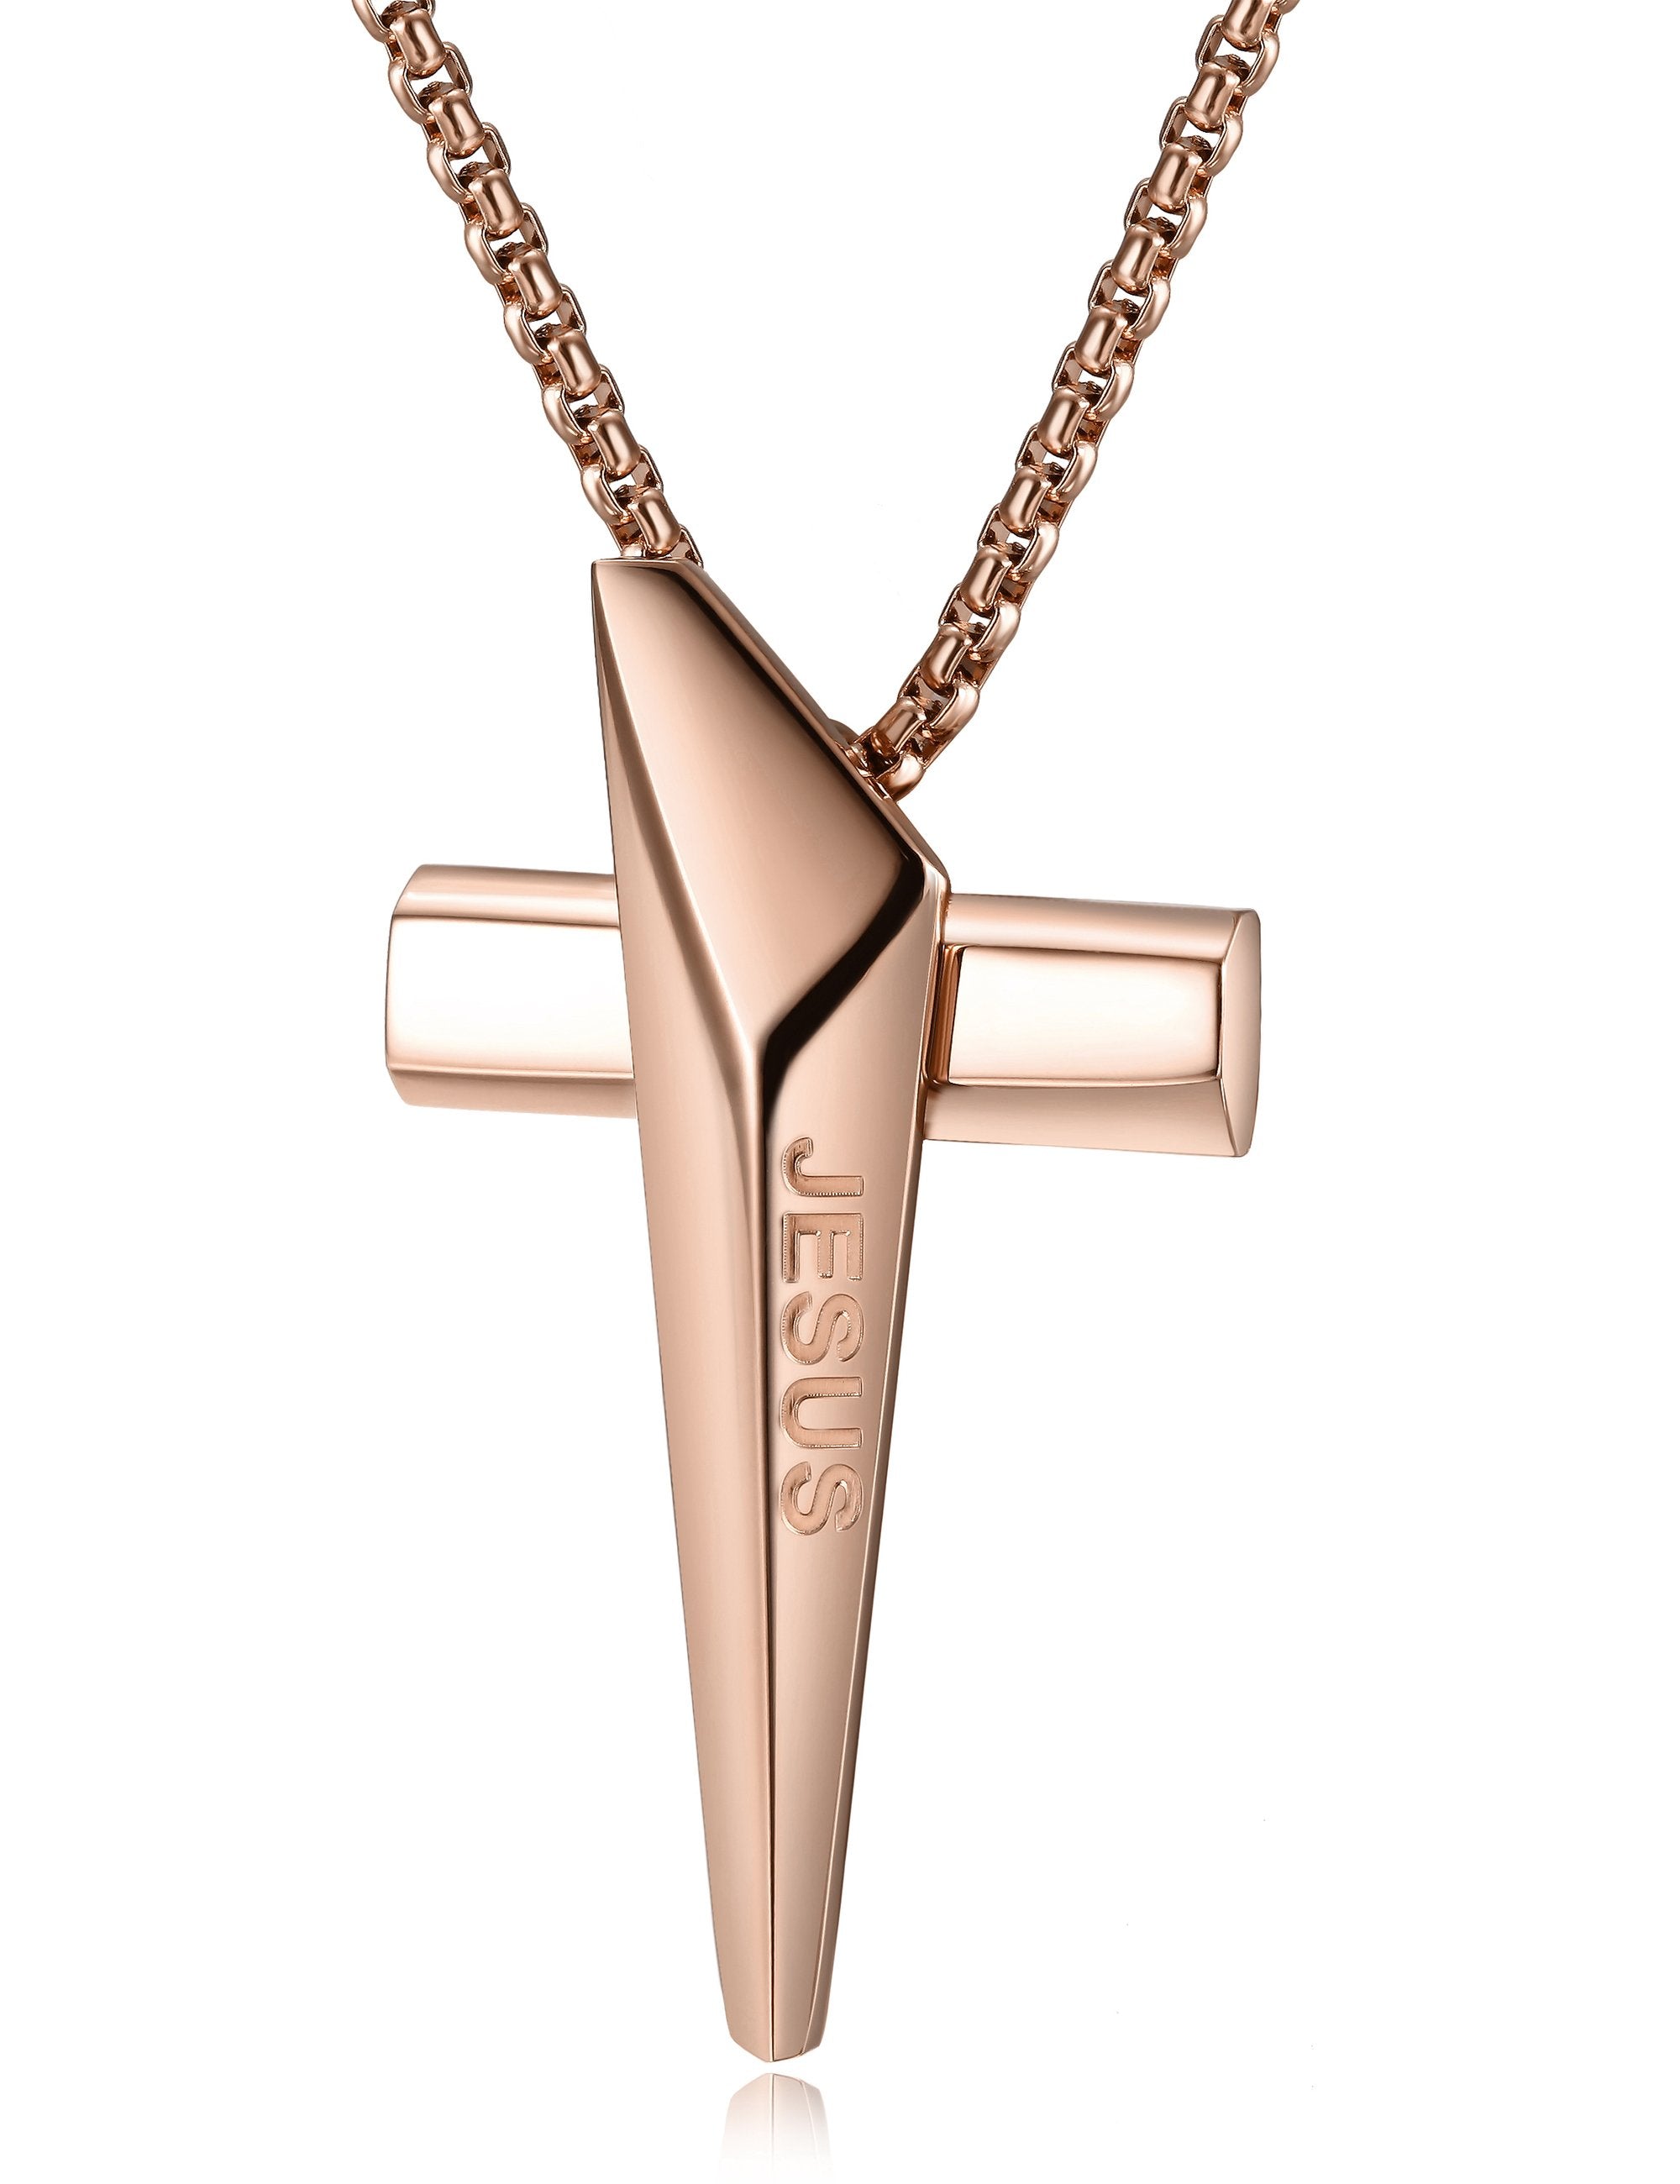 Hypoallergenic Belief Cross Necklace in Gold, Rose Gold, and Silver Stainless Steel for Women - Jewelry & Watches - Bijou Her -  -  - 